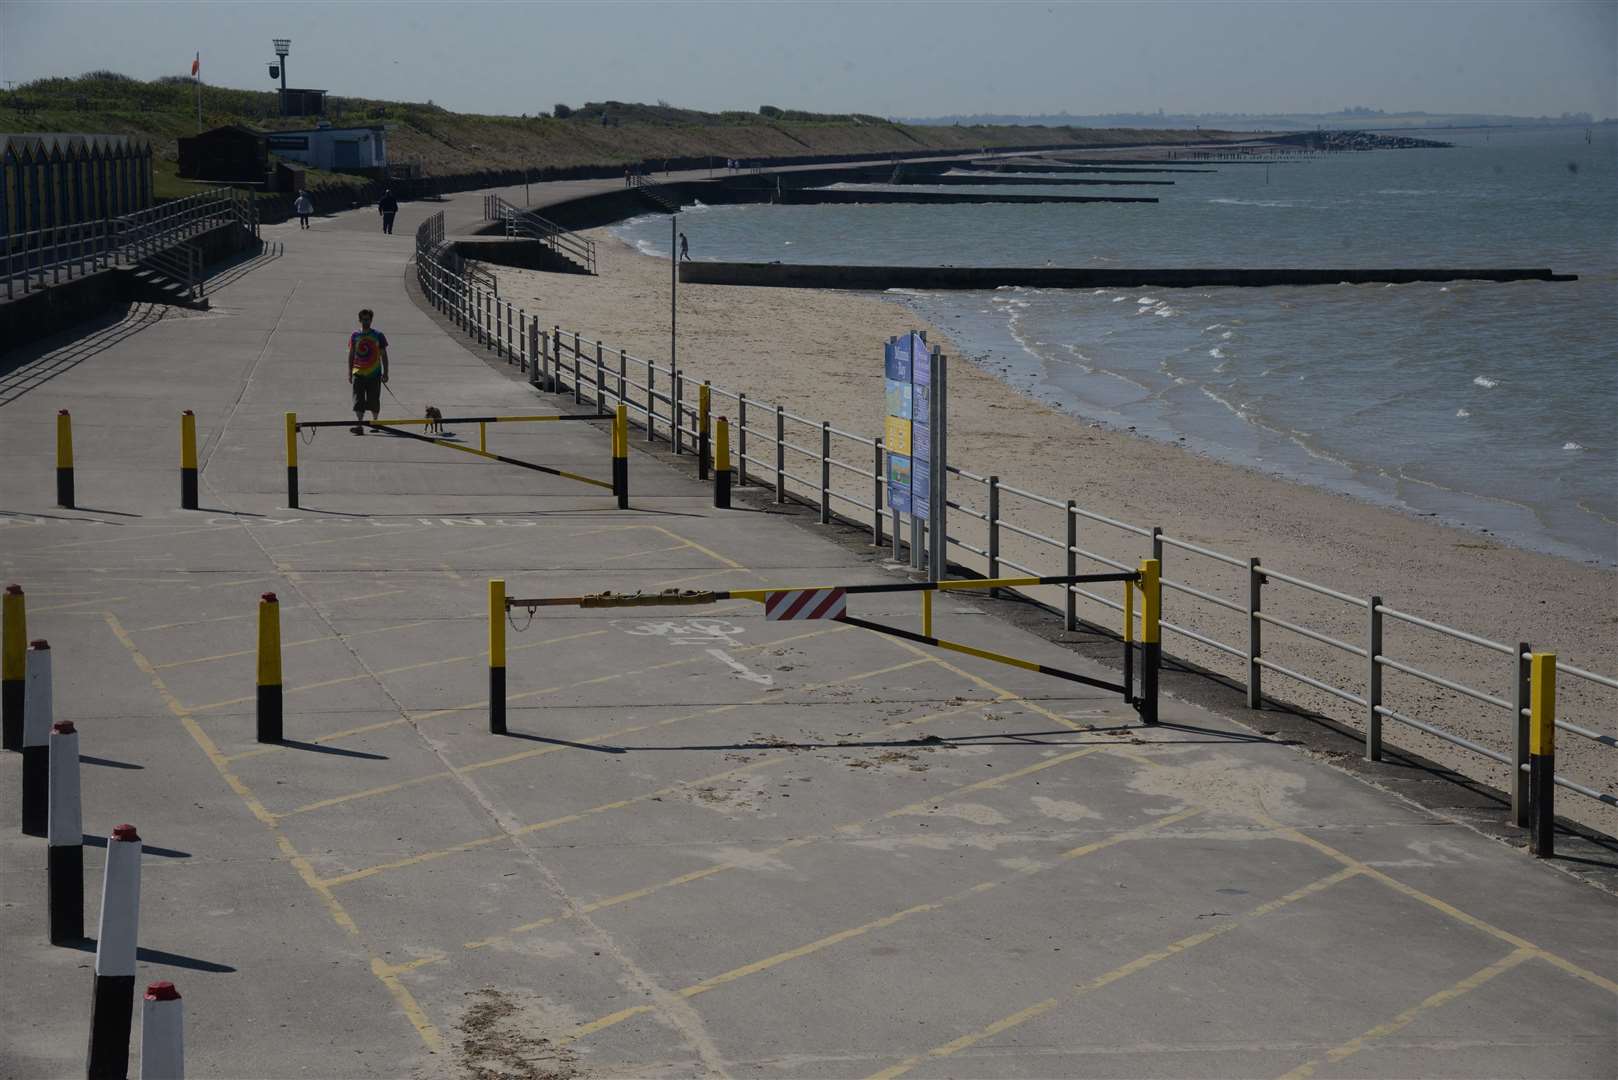 The seafront at Minnis Bay, Birchington